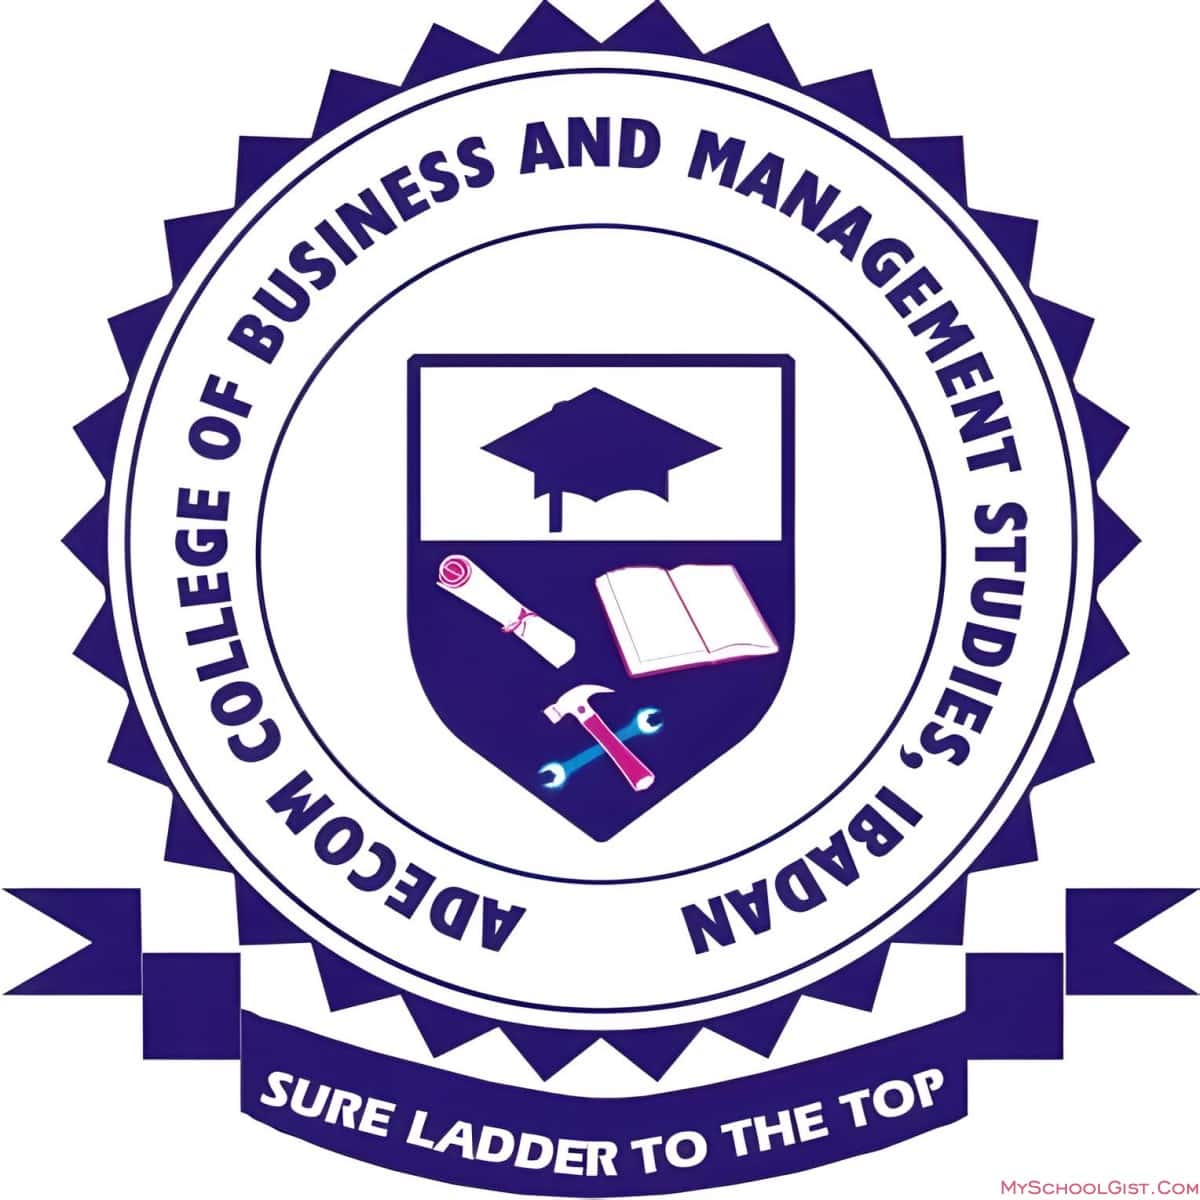 Adecom College of Business and Management 5th Matriculation Ceremony